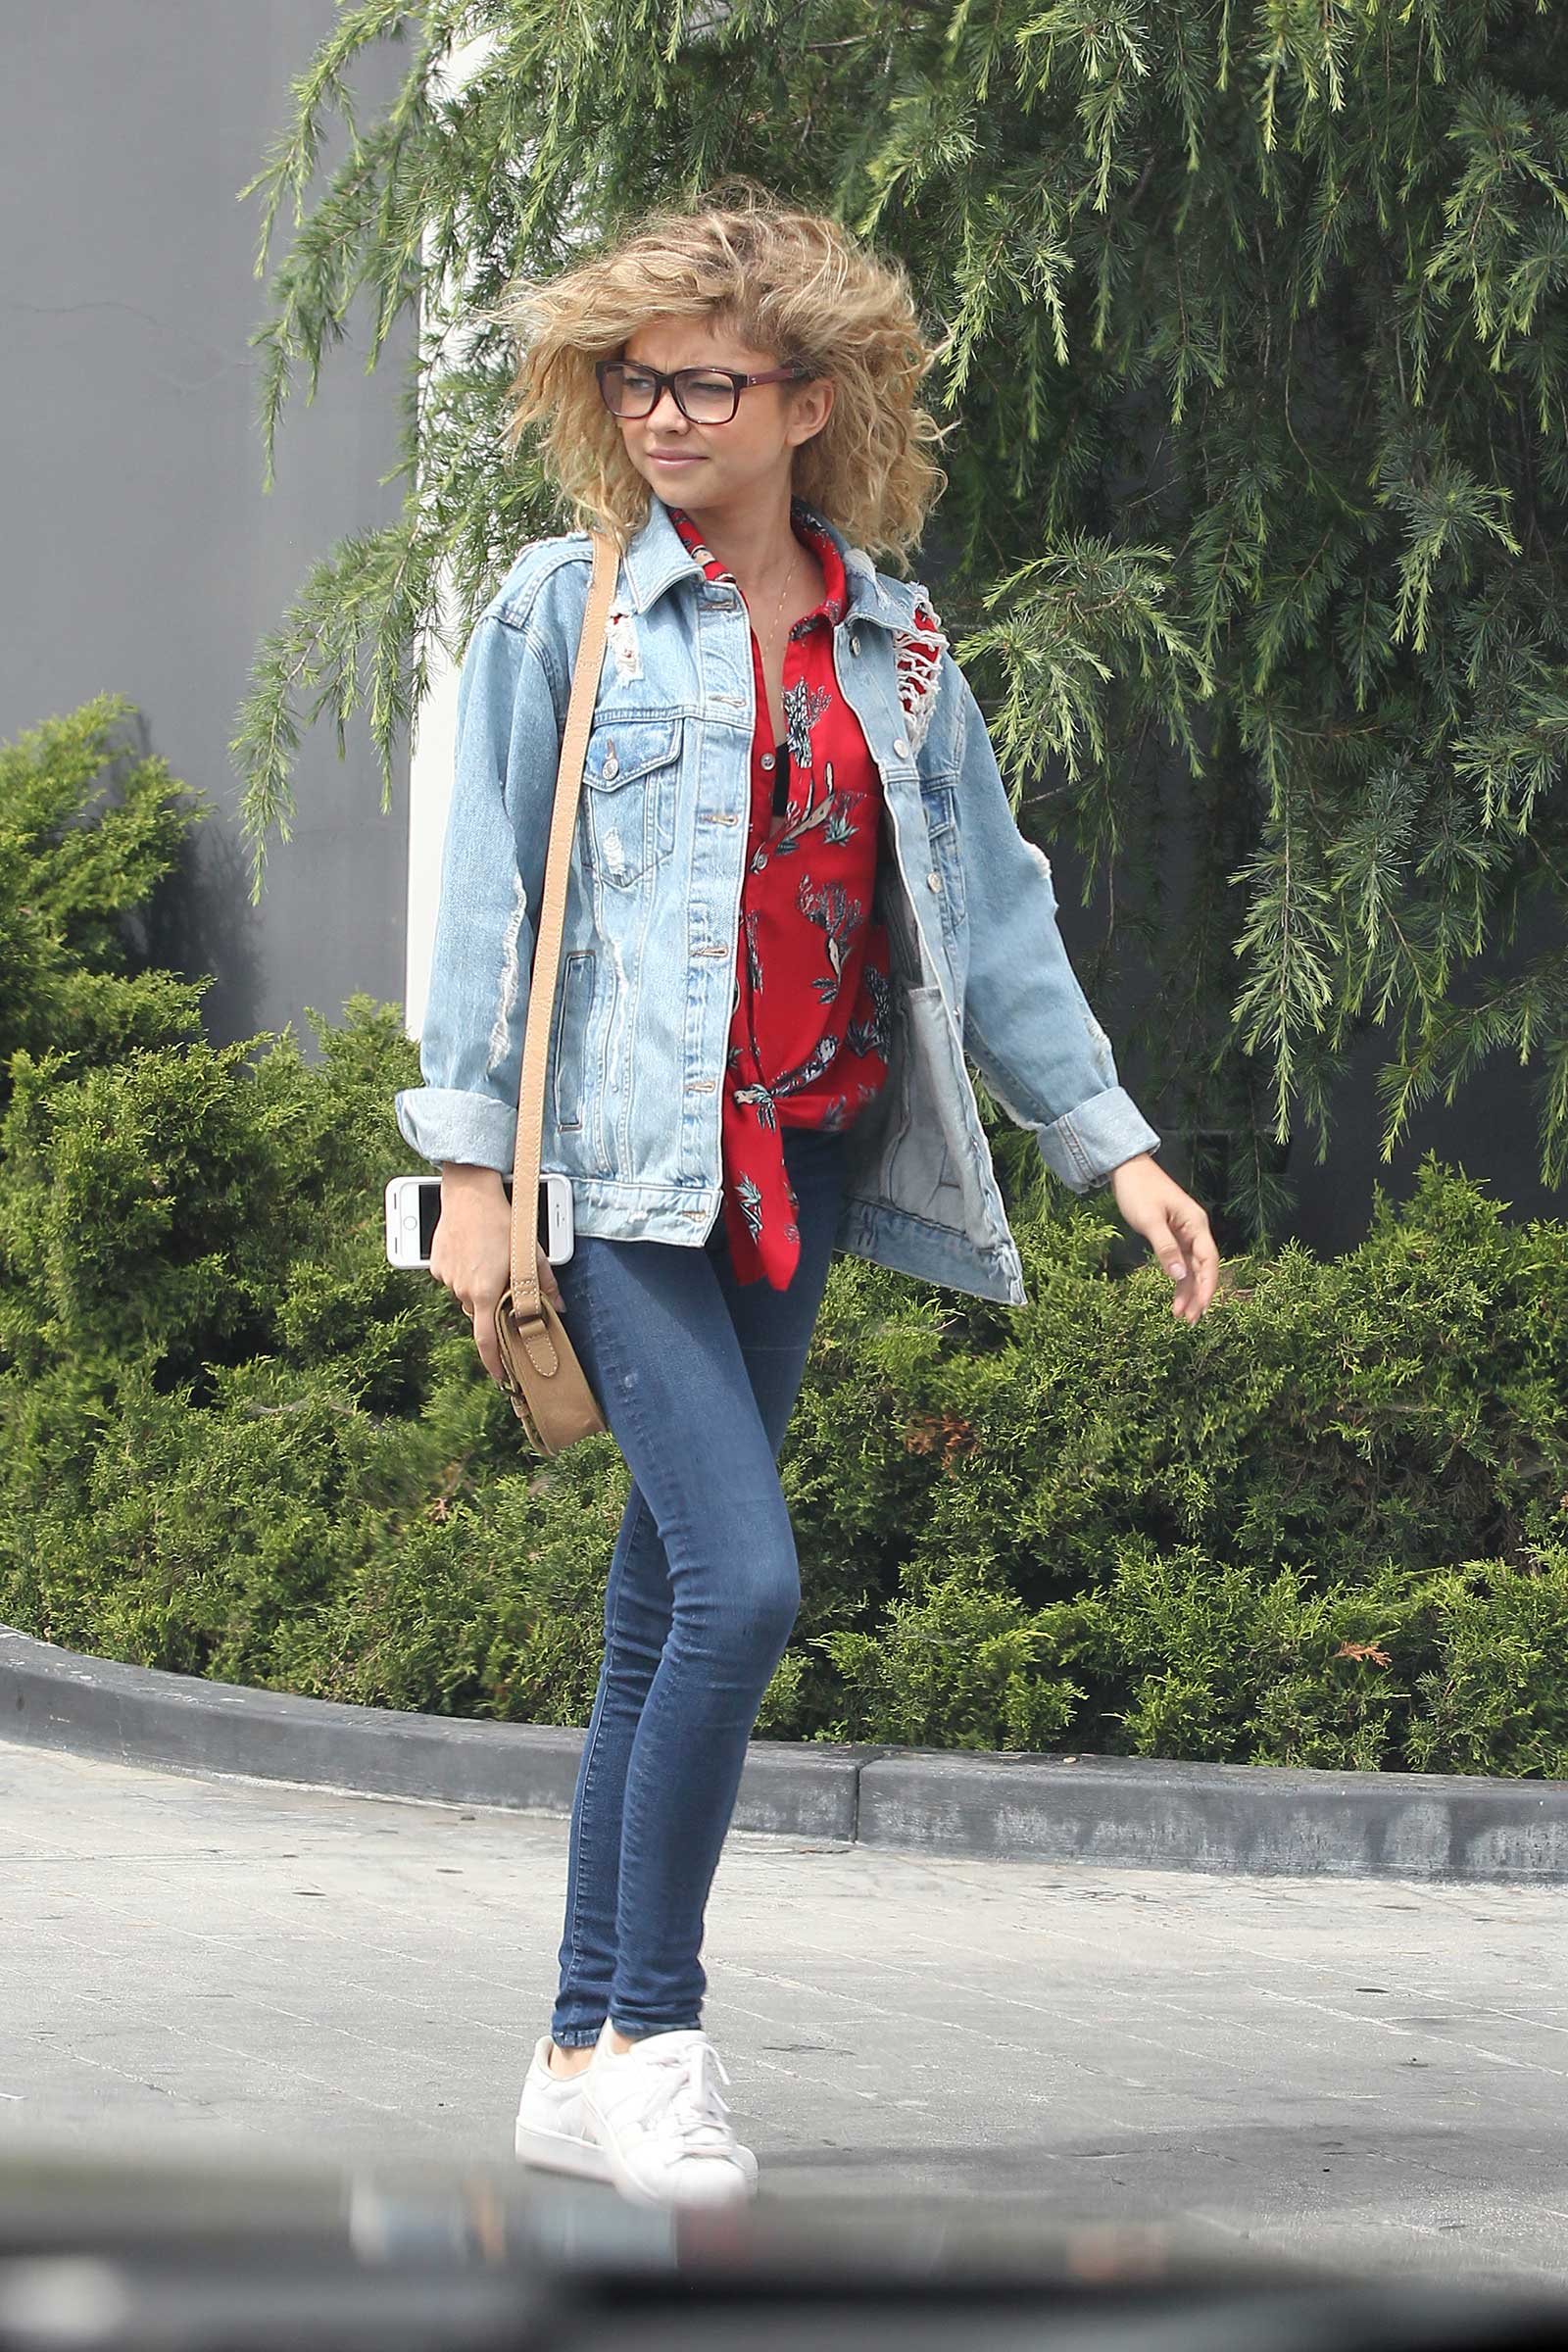 Sarah Hyland is cute and casual in a jean jacket, red print shirt and white sneakers.